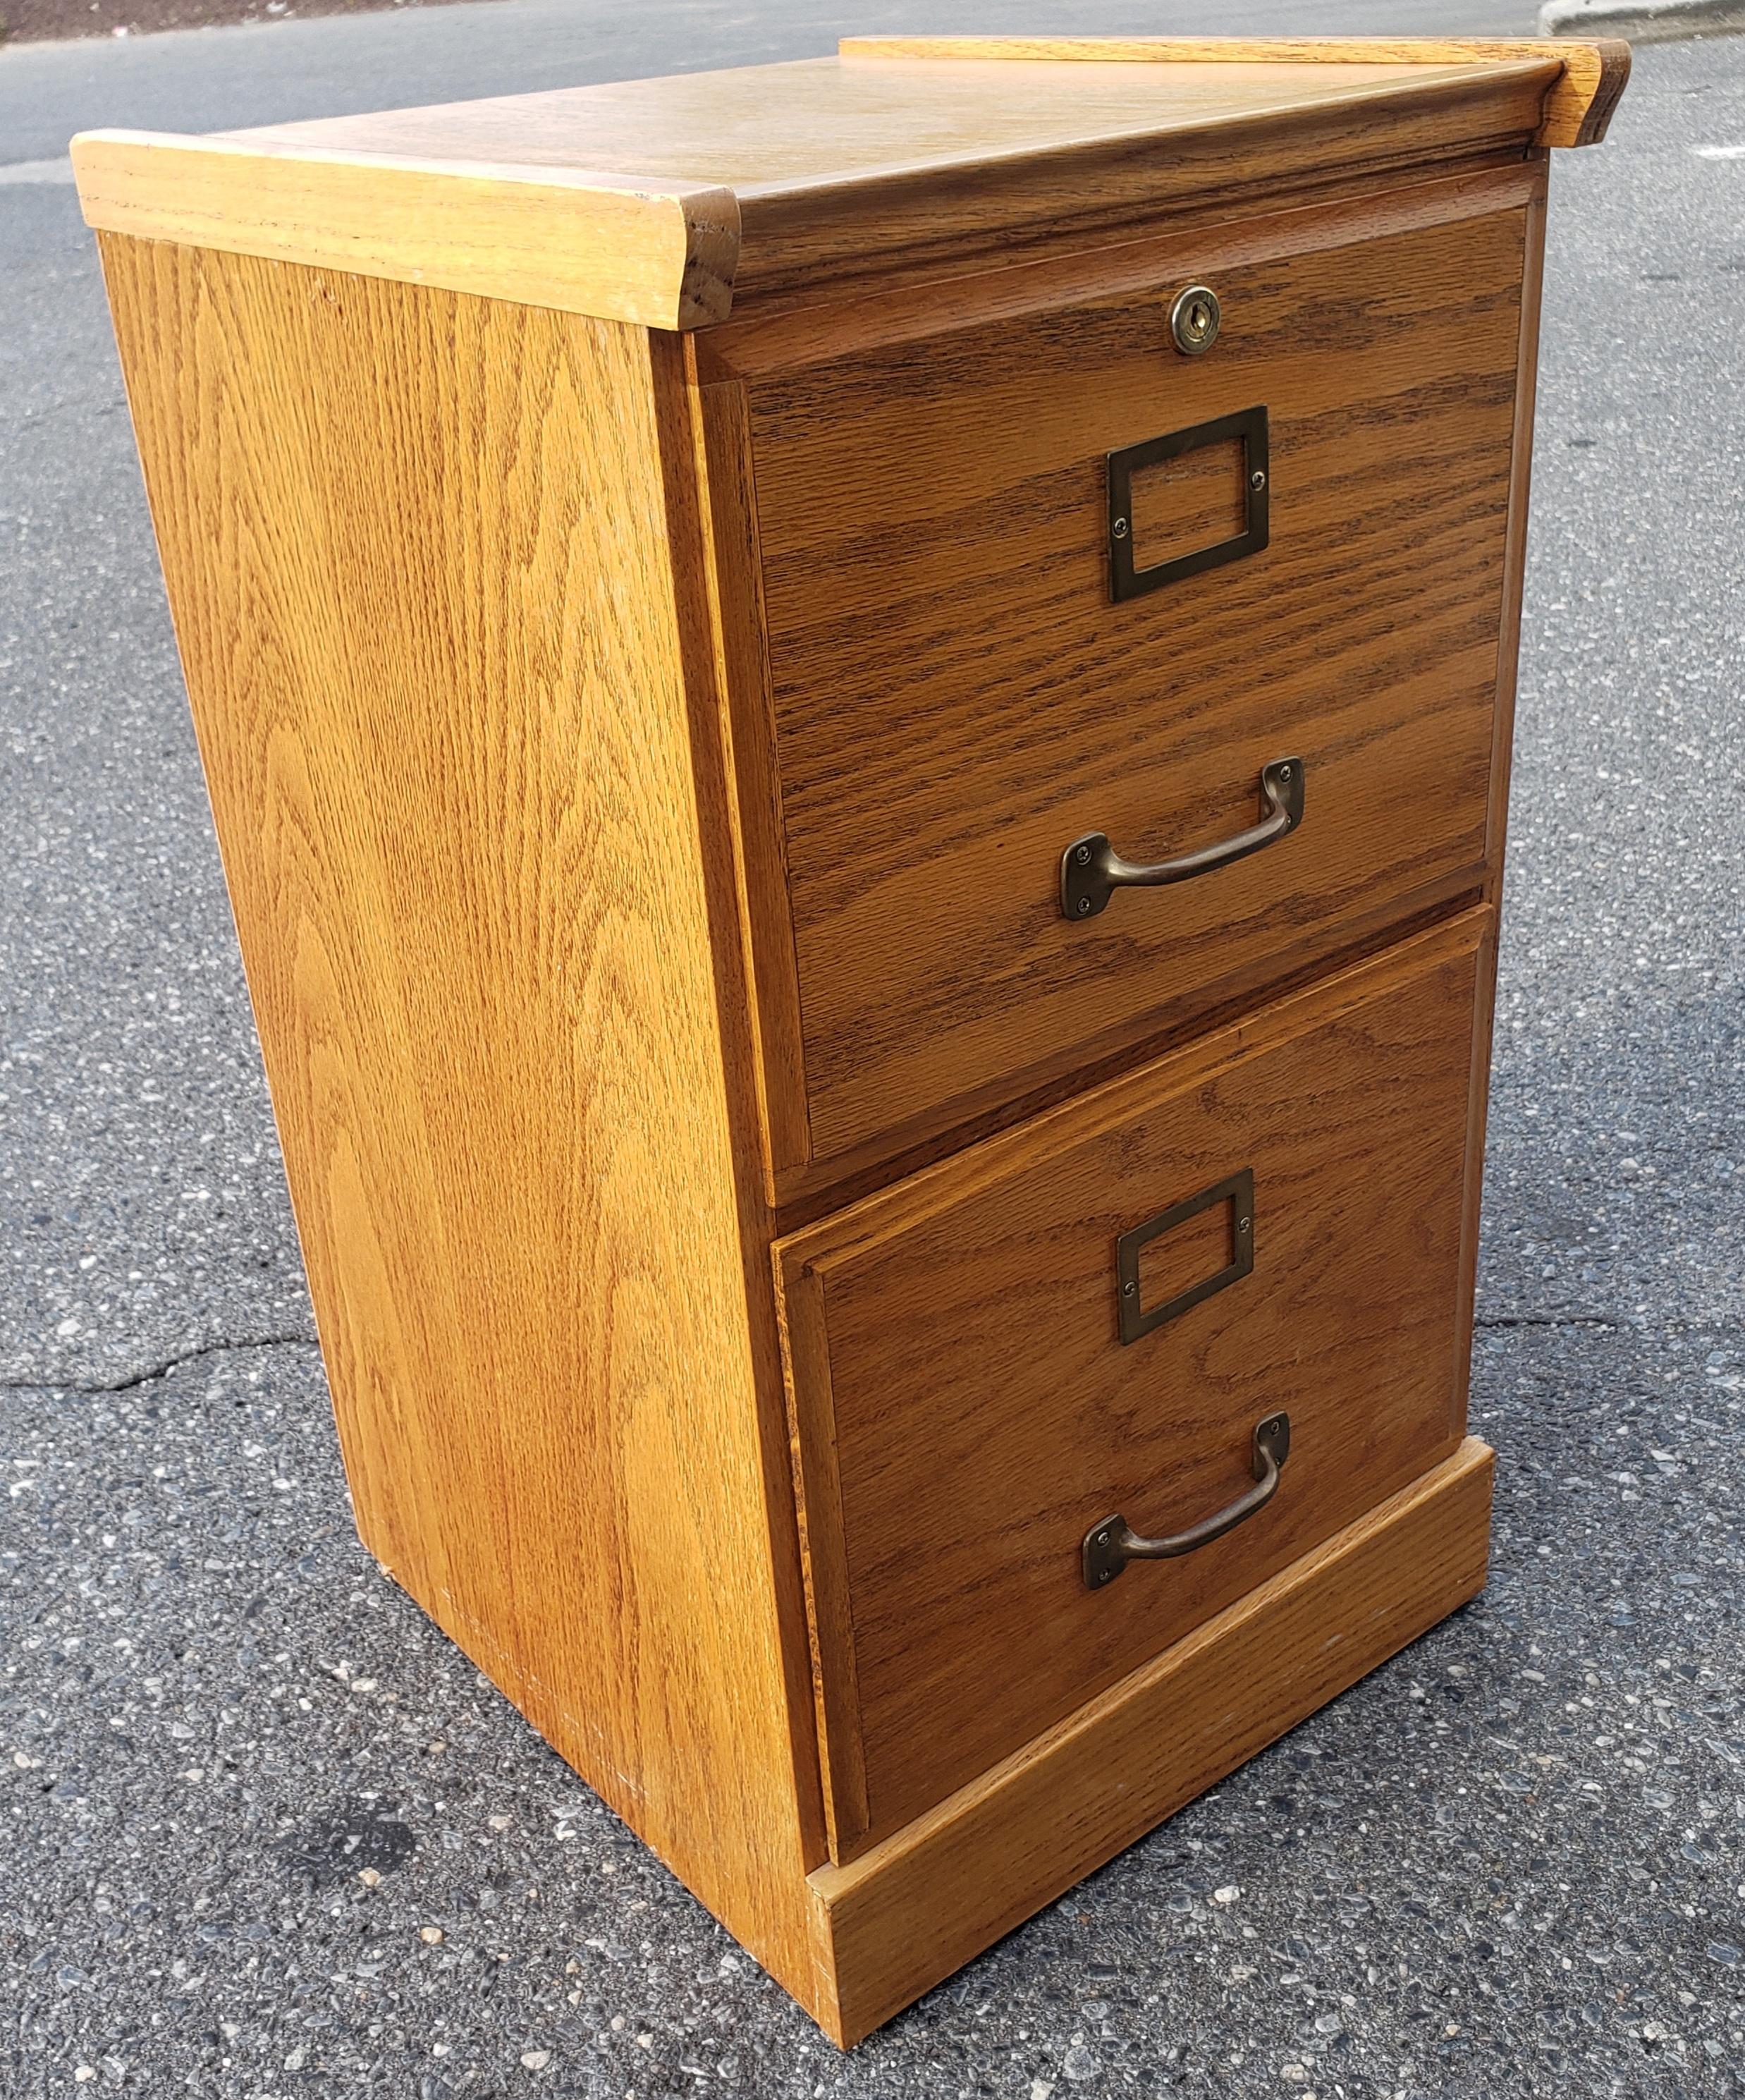 Attractive and useful are two words to describe this nice oak 2-drawer file cabinet. It has a beautiful oak finish with solid wood trims. The entire cabinet measures 16